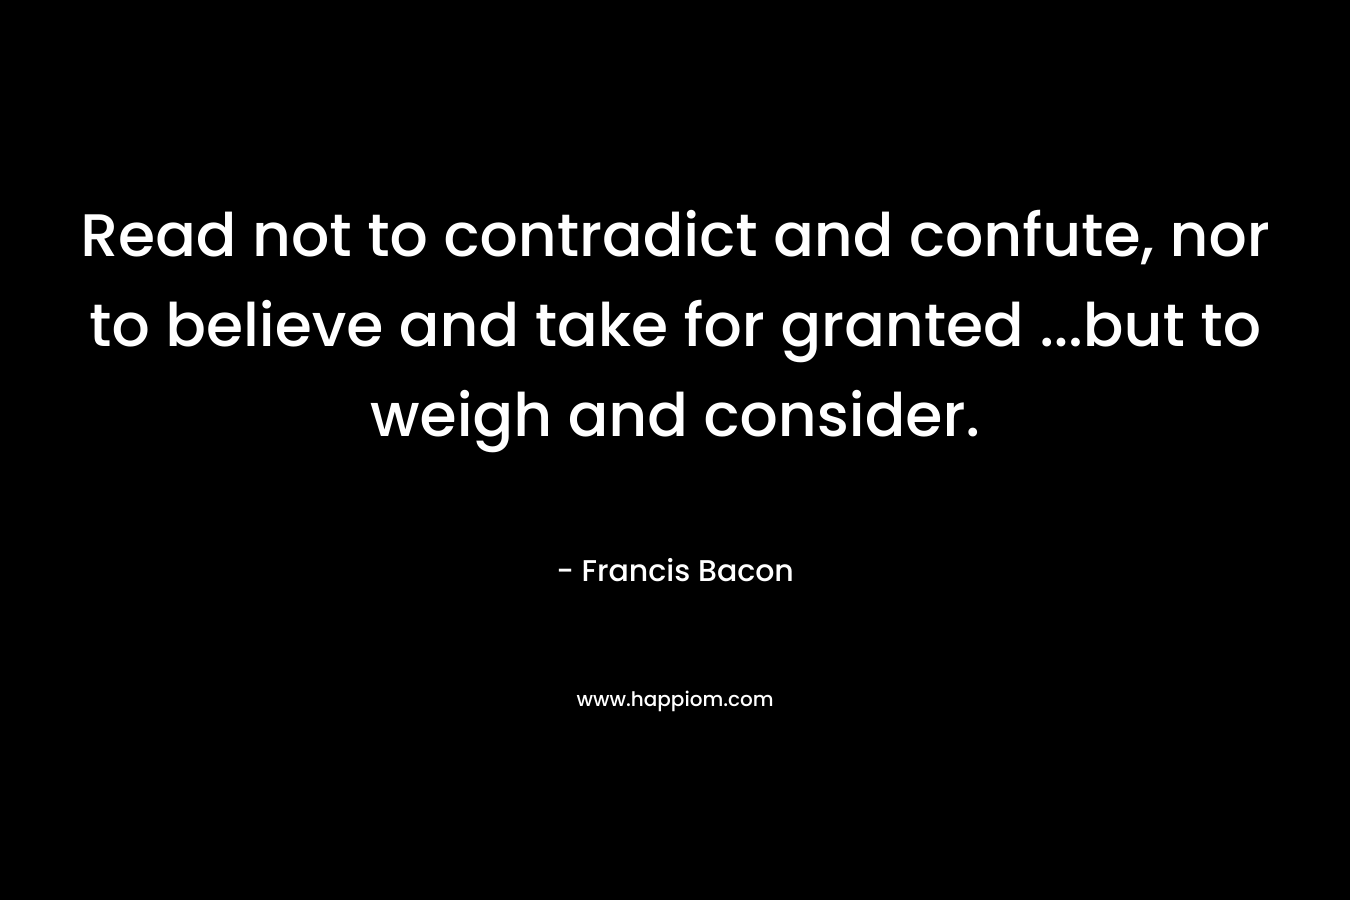 Read not to contradict and confute, nor to believe and take for granted …but to weigh and consider. – Francis Bacon